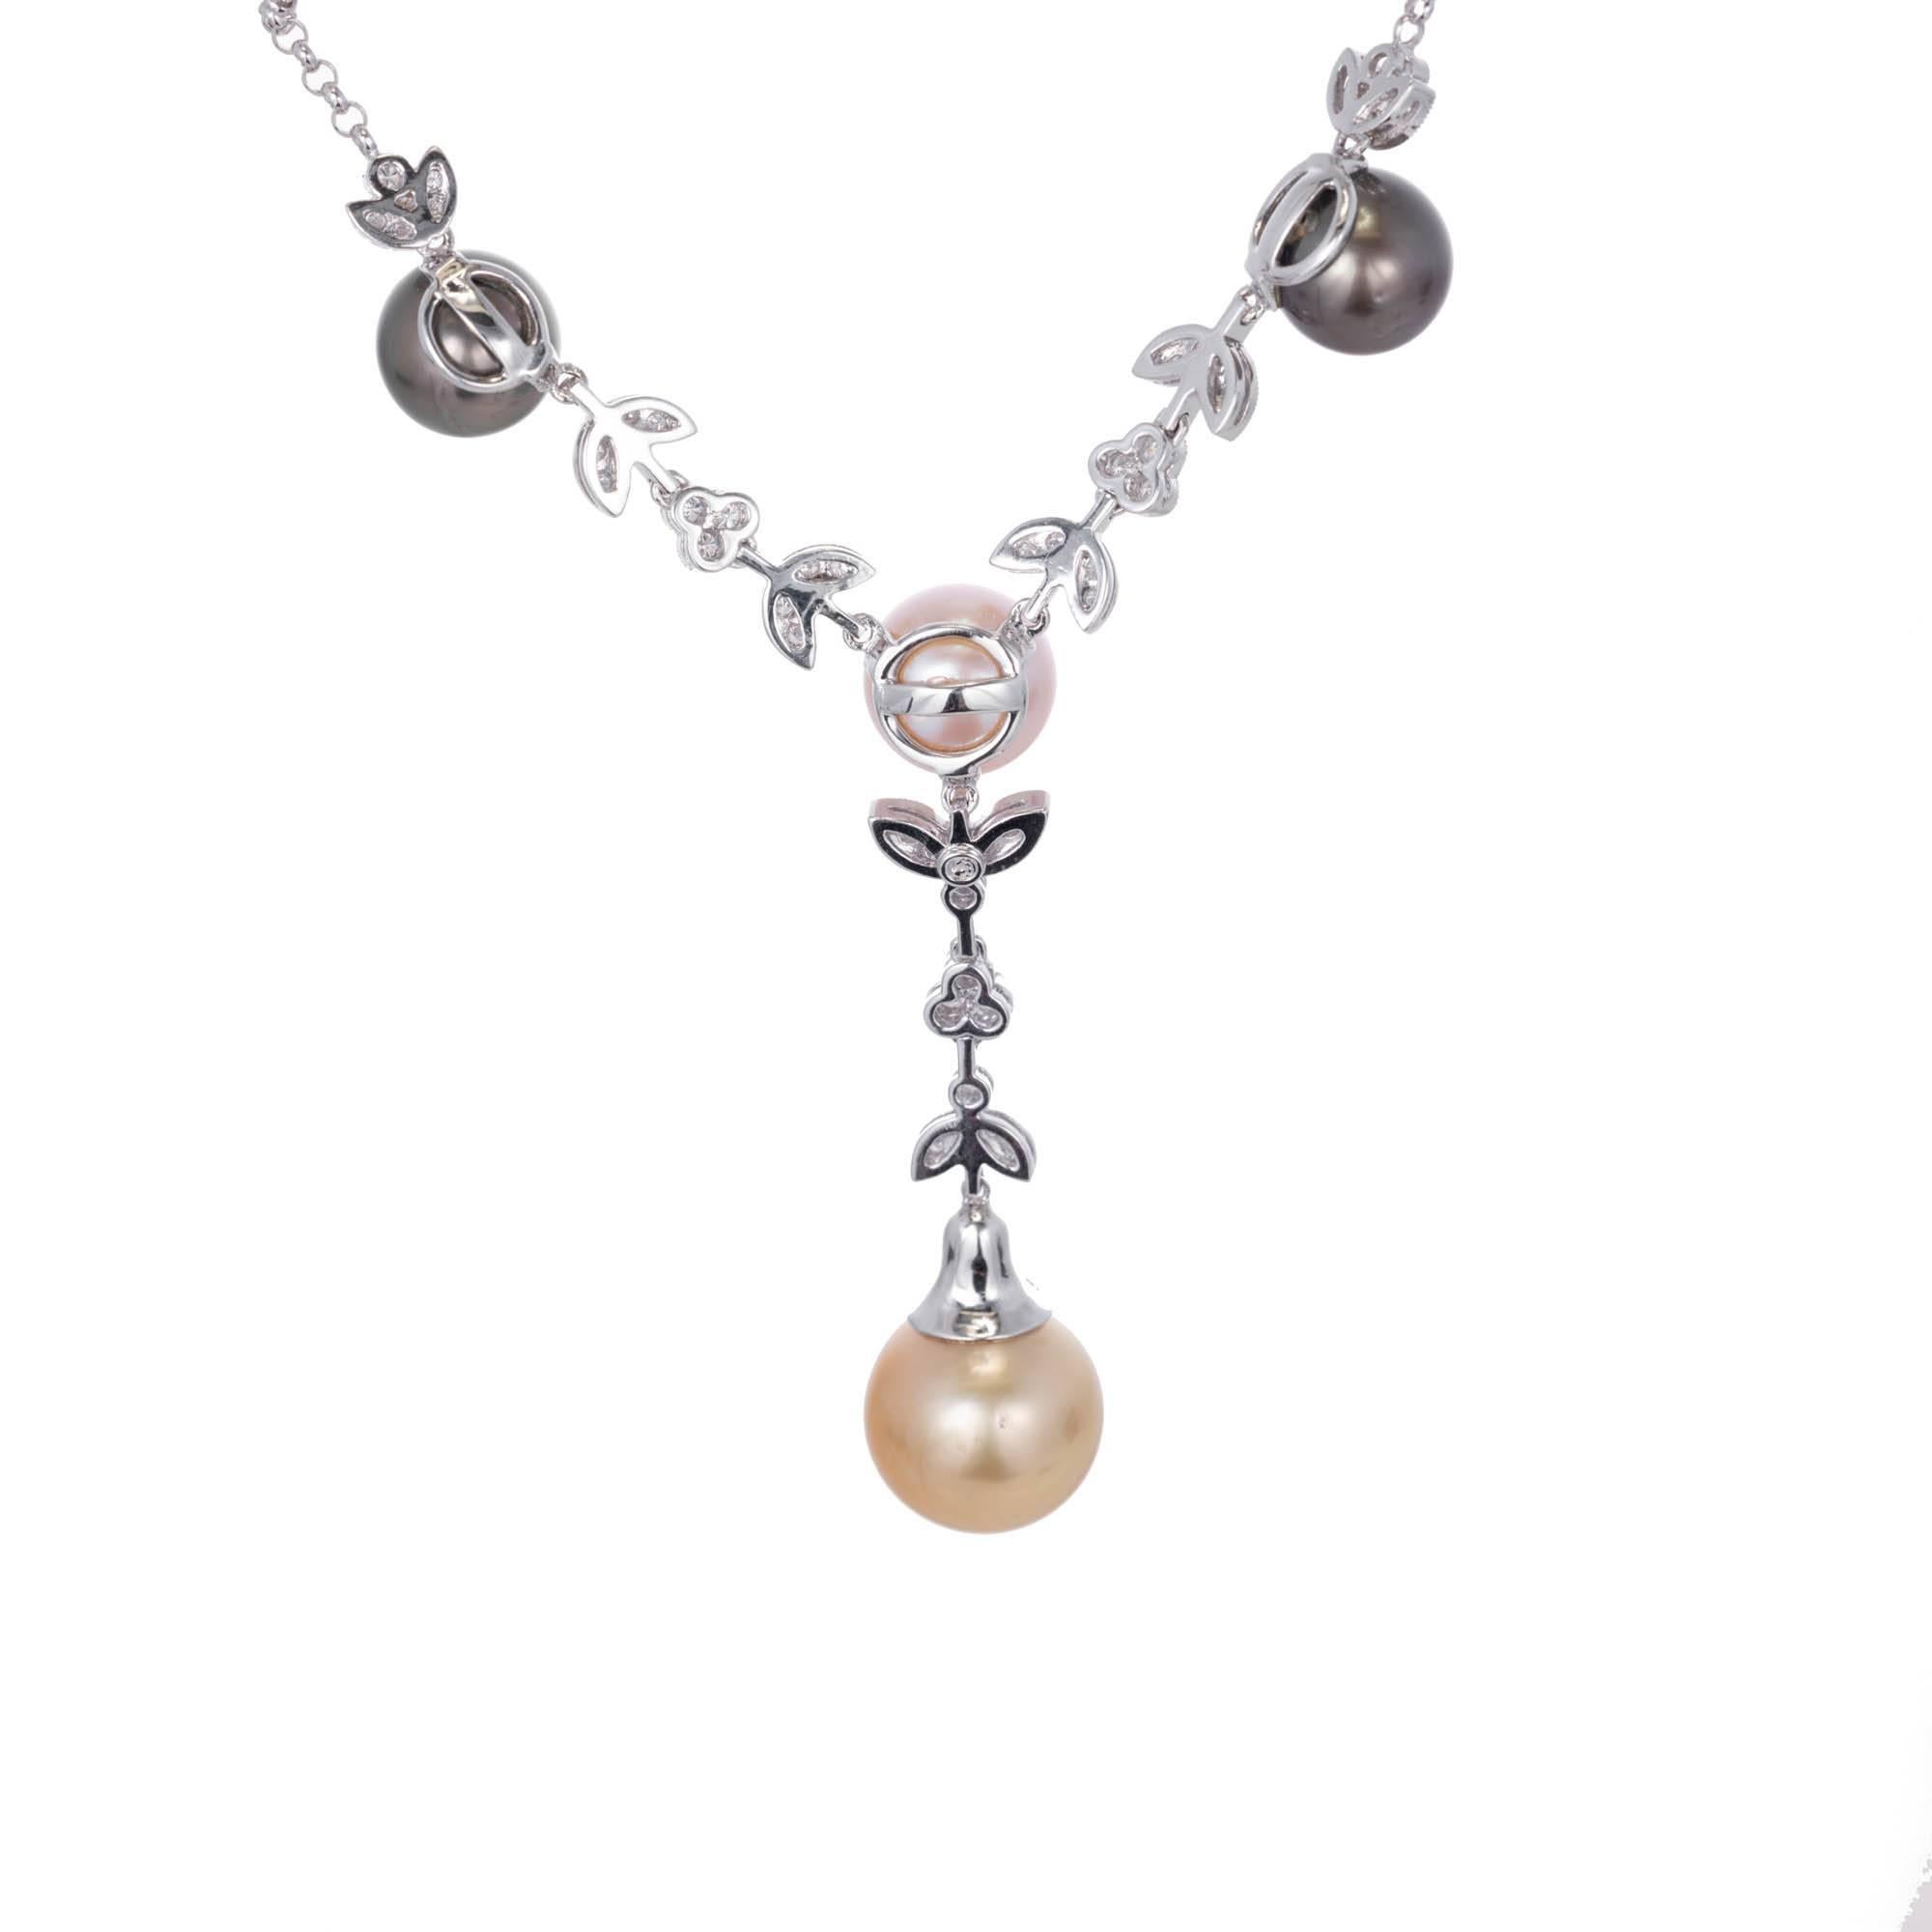 Diamond and South Sea Cultured Pearl drop necklace. In 18k white gold with bright sparkly full cut Diamond accents and black, pink and golden South Sea Cultured Pearls with good lustré and few blemishes.

18k white gold
81 round full cut Diamonds,